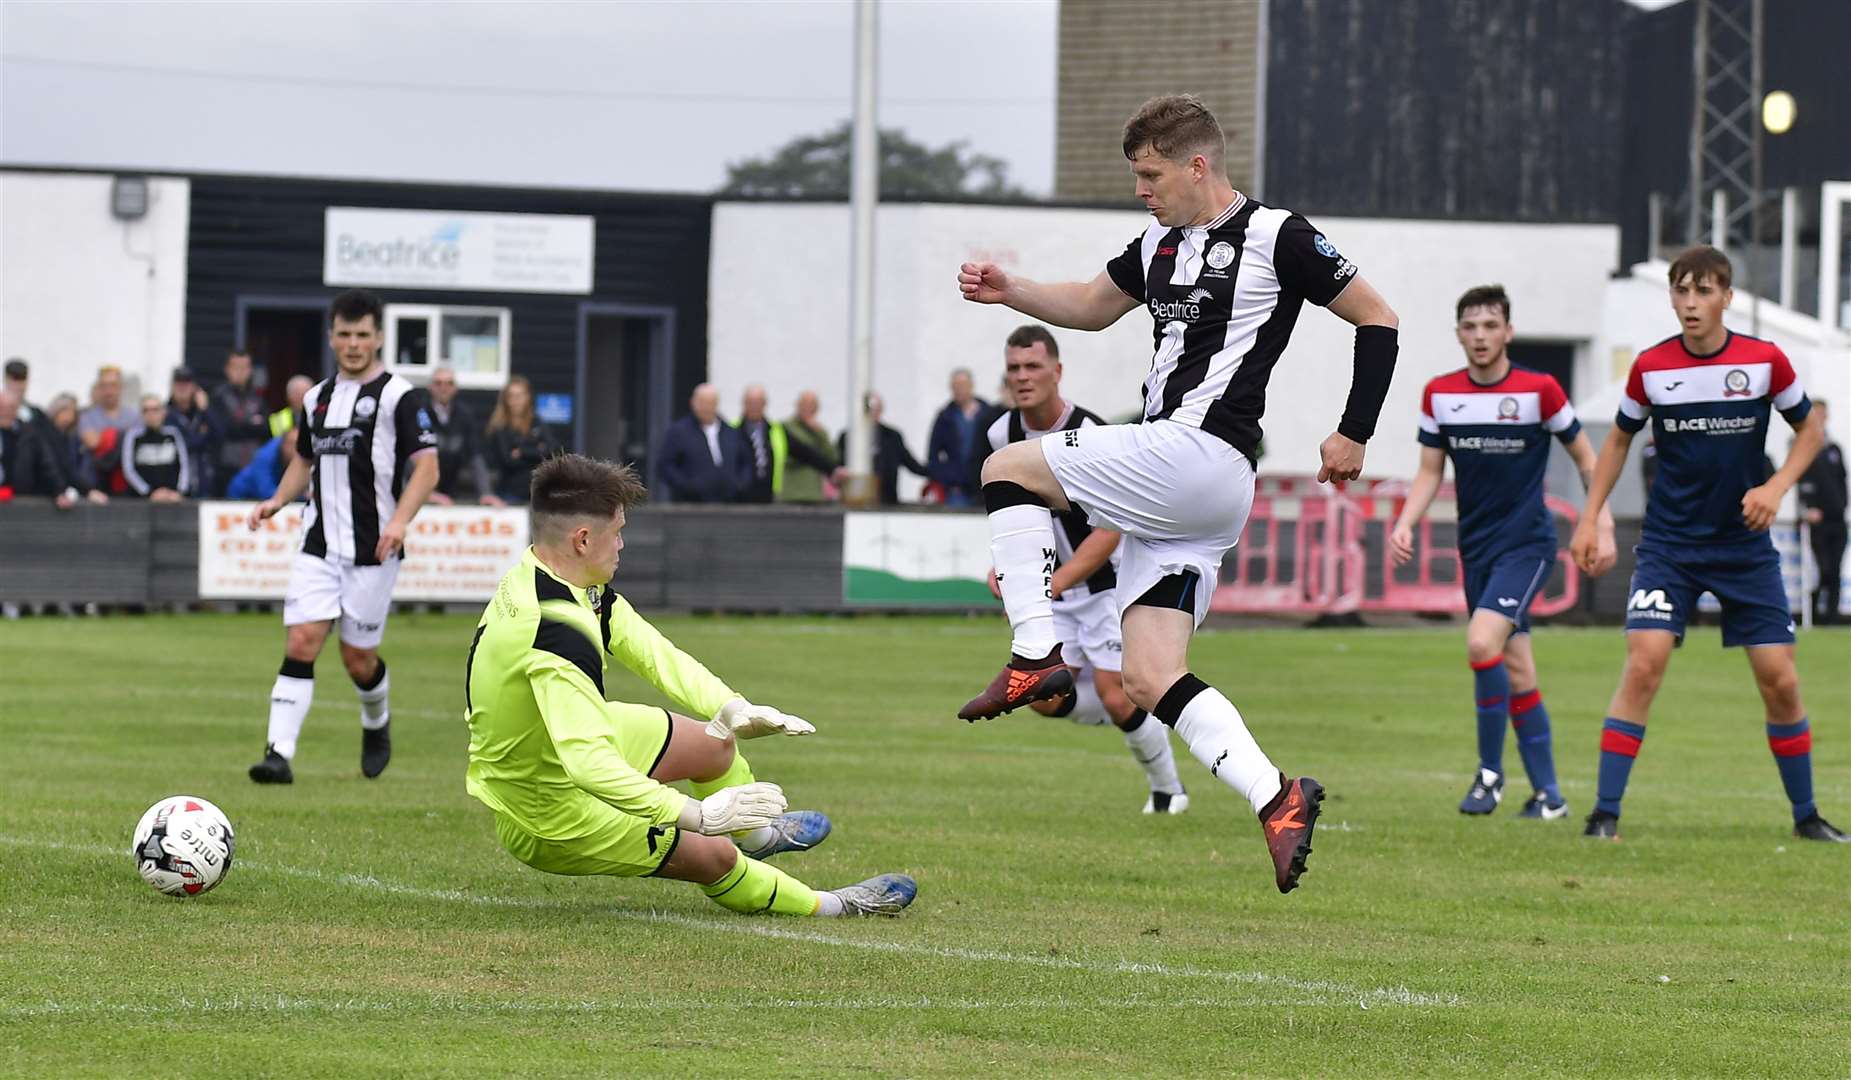 Ross Allan knocks the ball past Turriff United keeper Tim Findlay to put Wick Academy in front when the teams met at Harmsworth Park in August. The match ended 1-1. Picture: Mel Roger